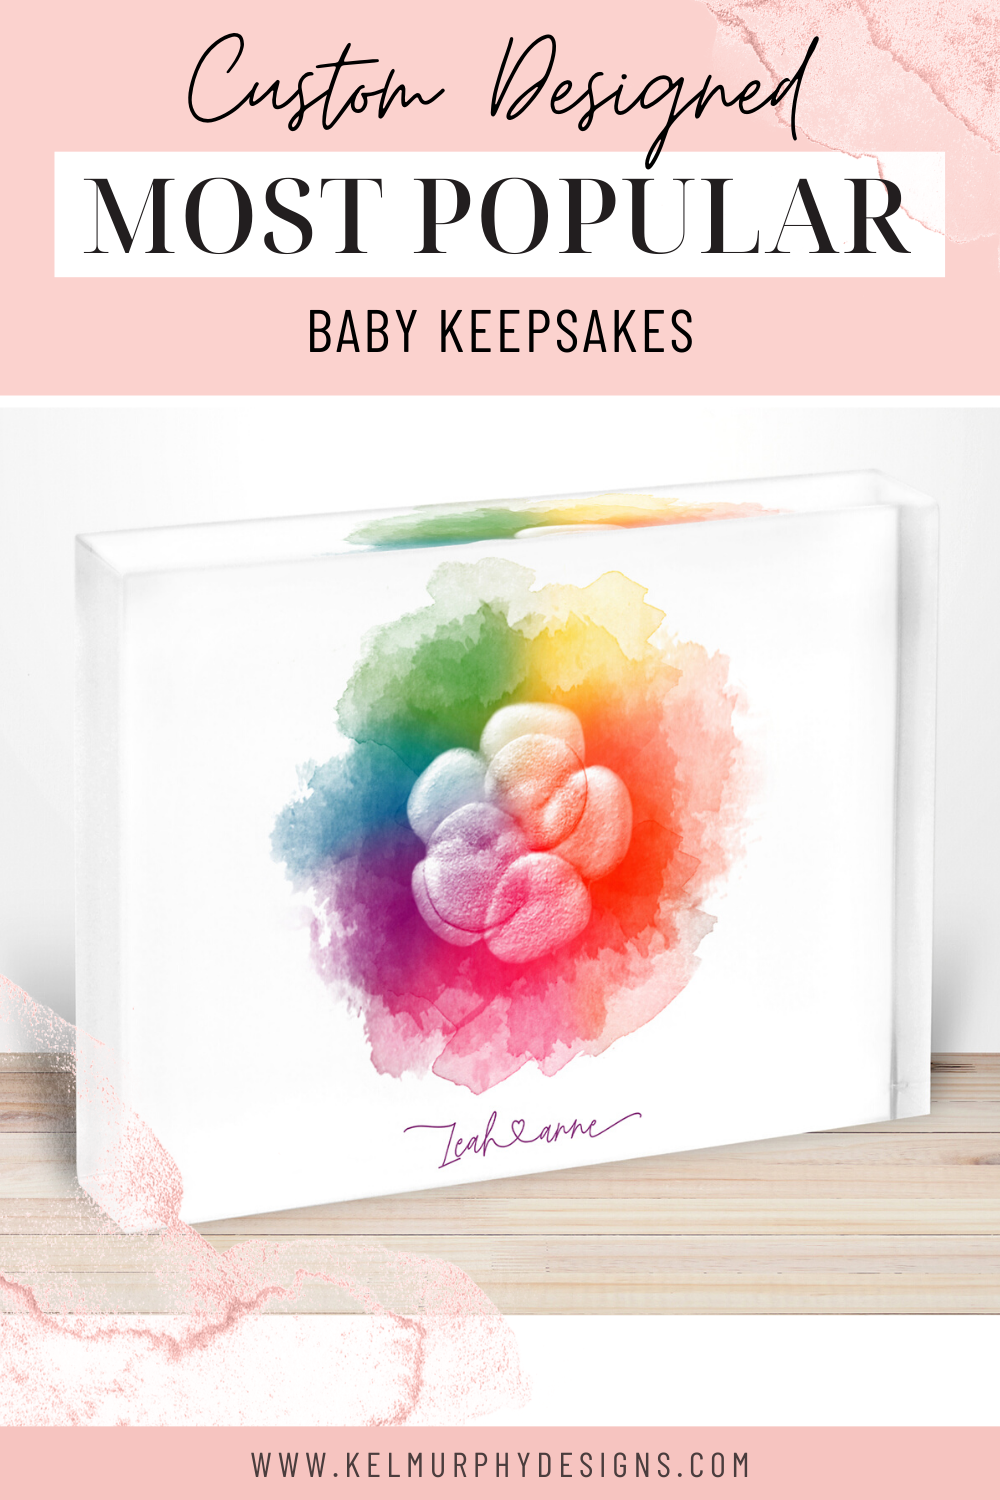 Most popular baby keepsakes new mom gifts baby shower gifts ultrasound art embryo designs